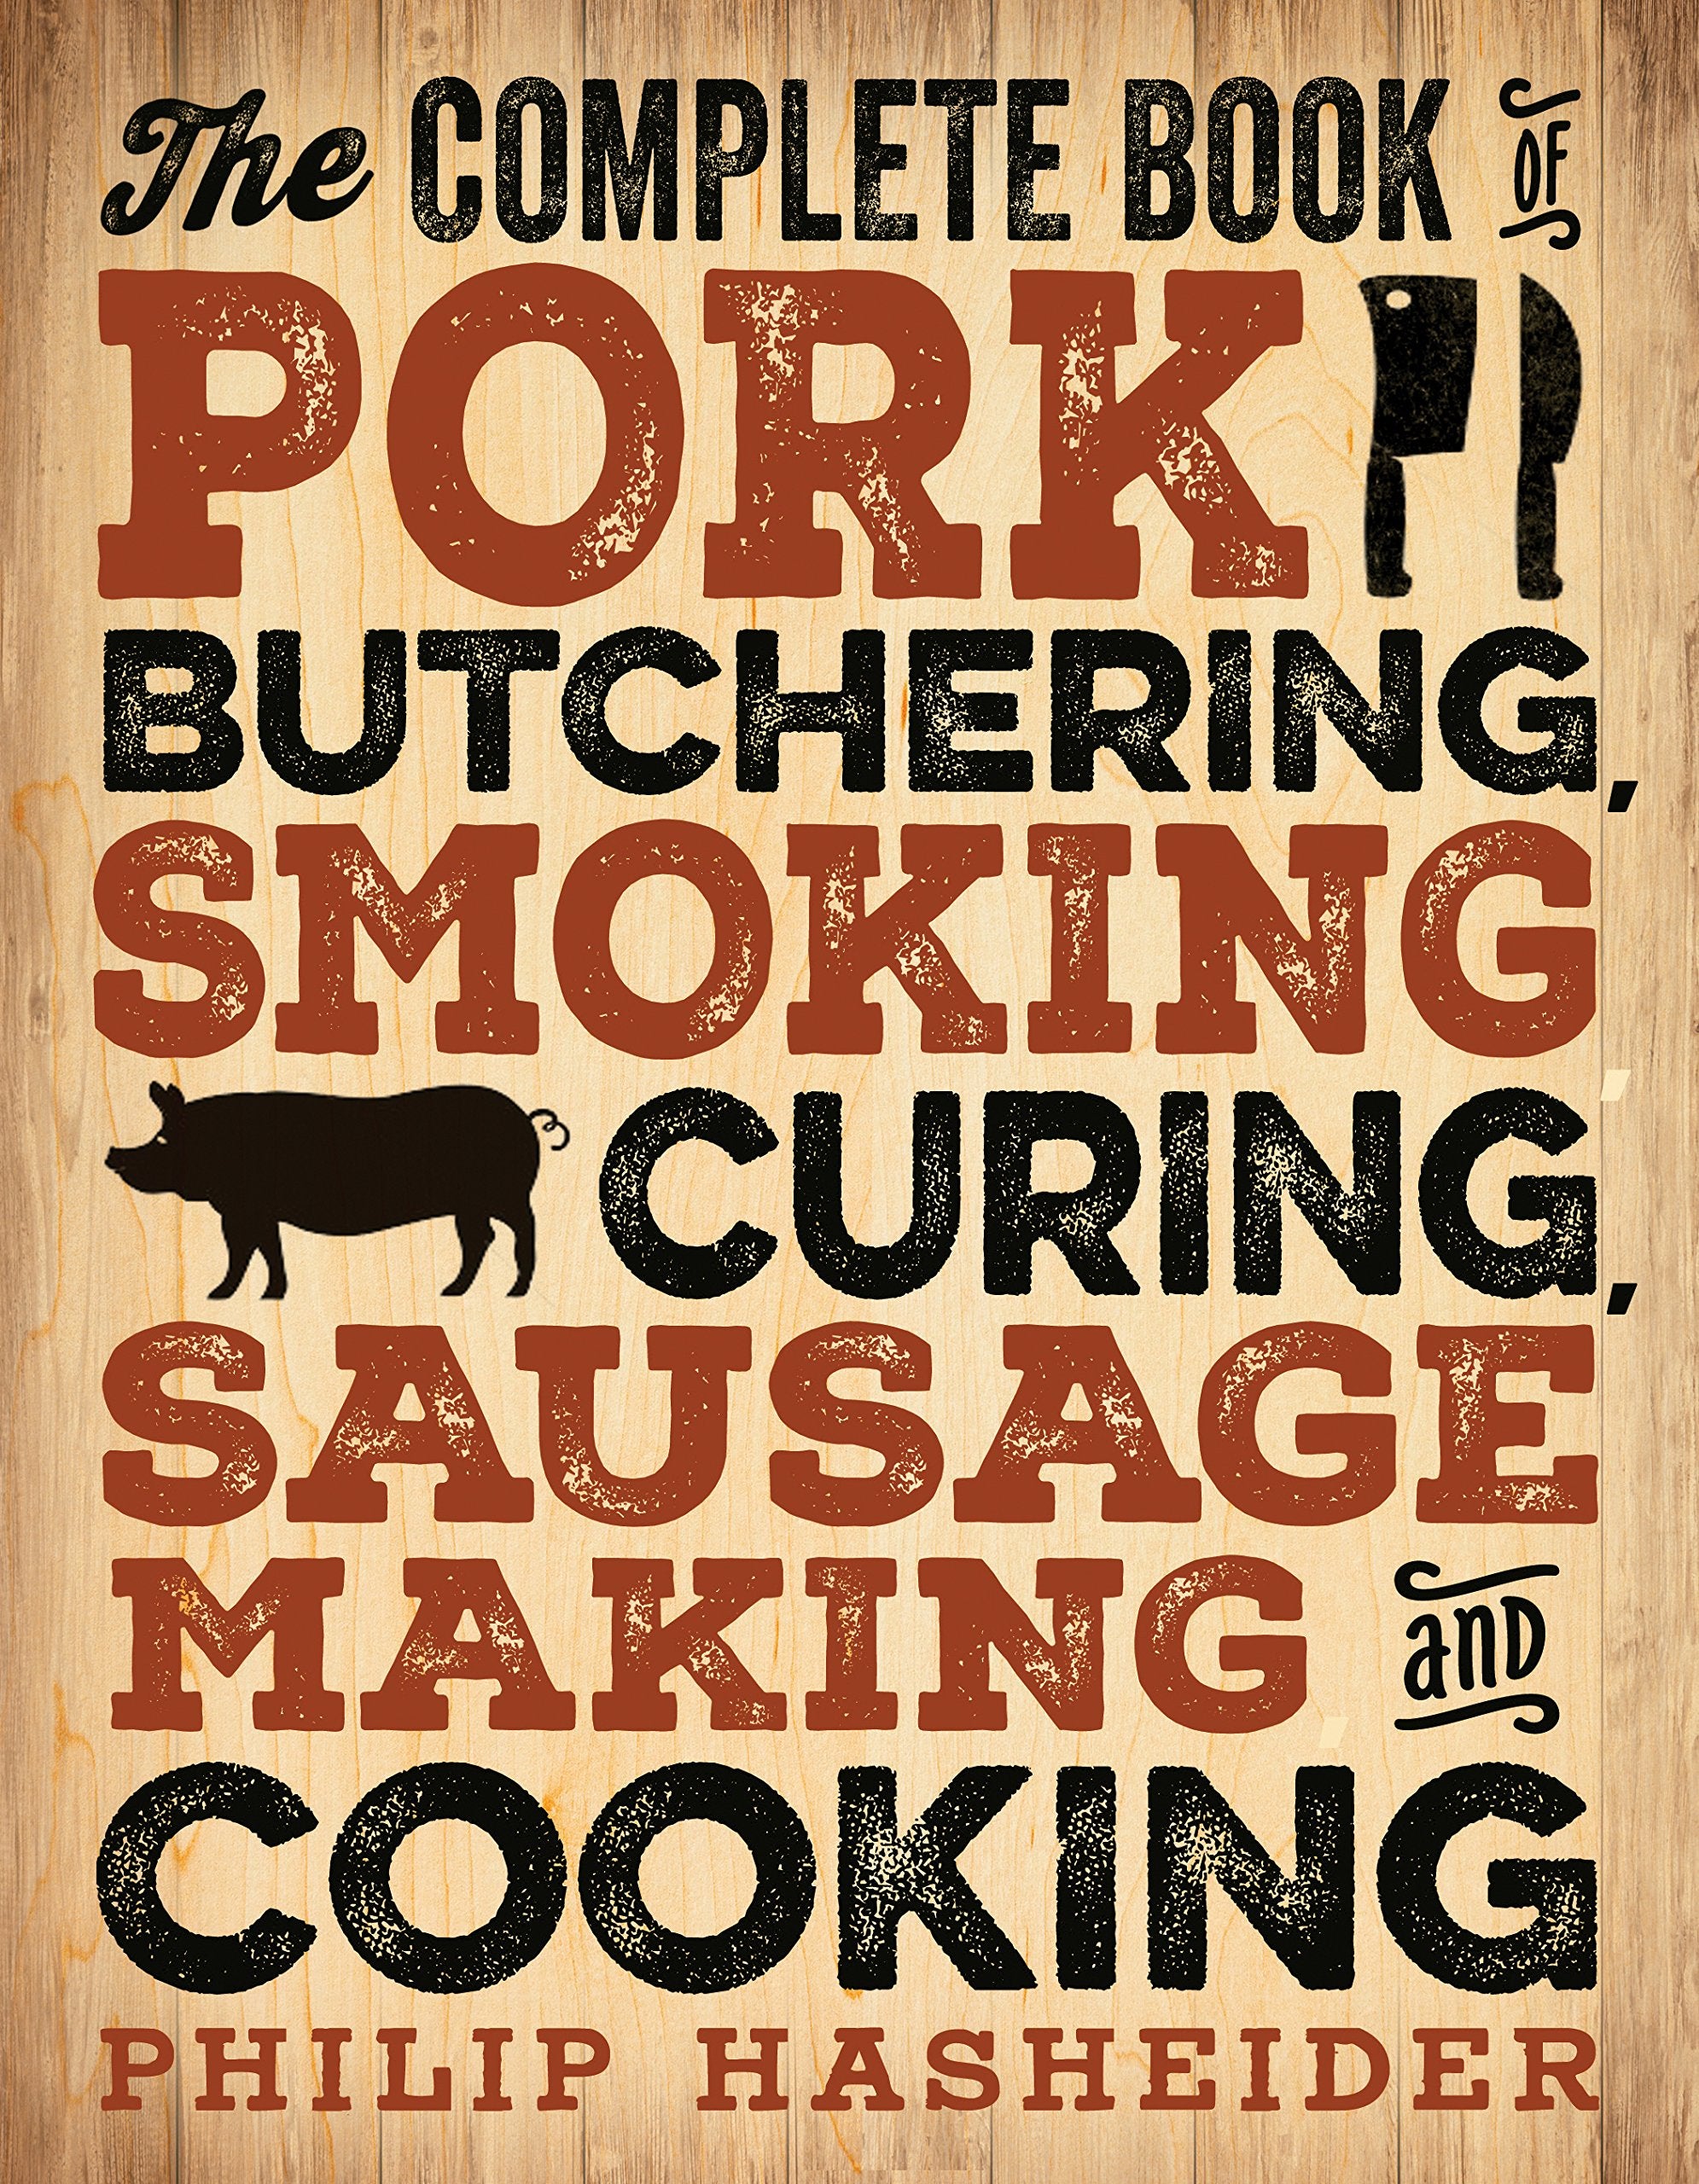 The Complete Book of Pork Butchering, Smoking, Curing, Sausage Making, and Cooking (Philip Hasheider)